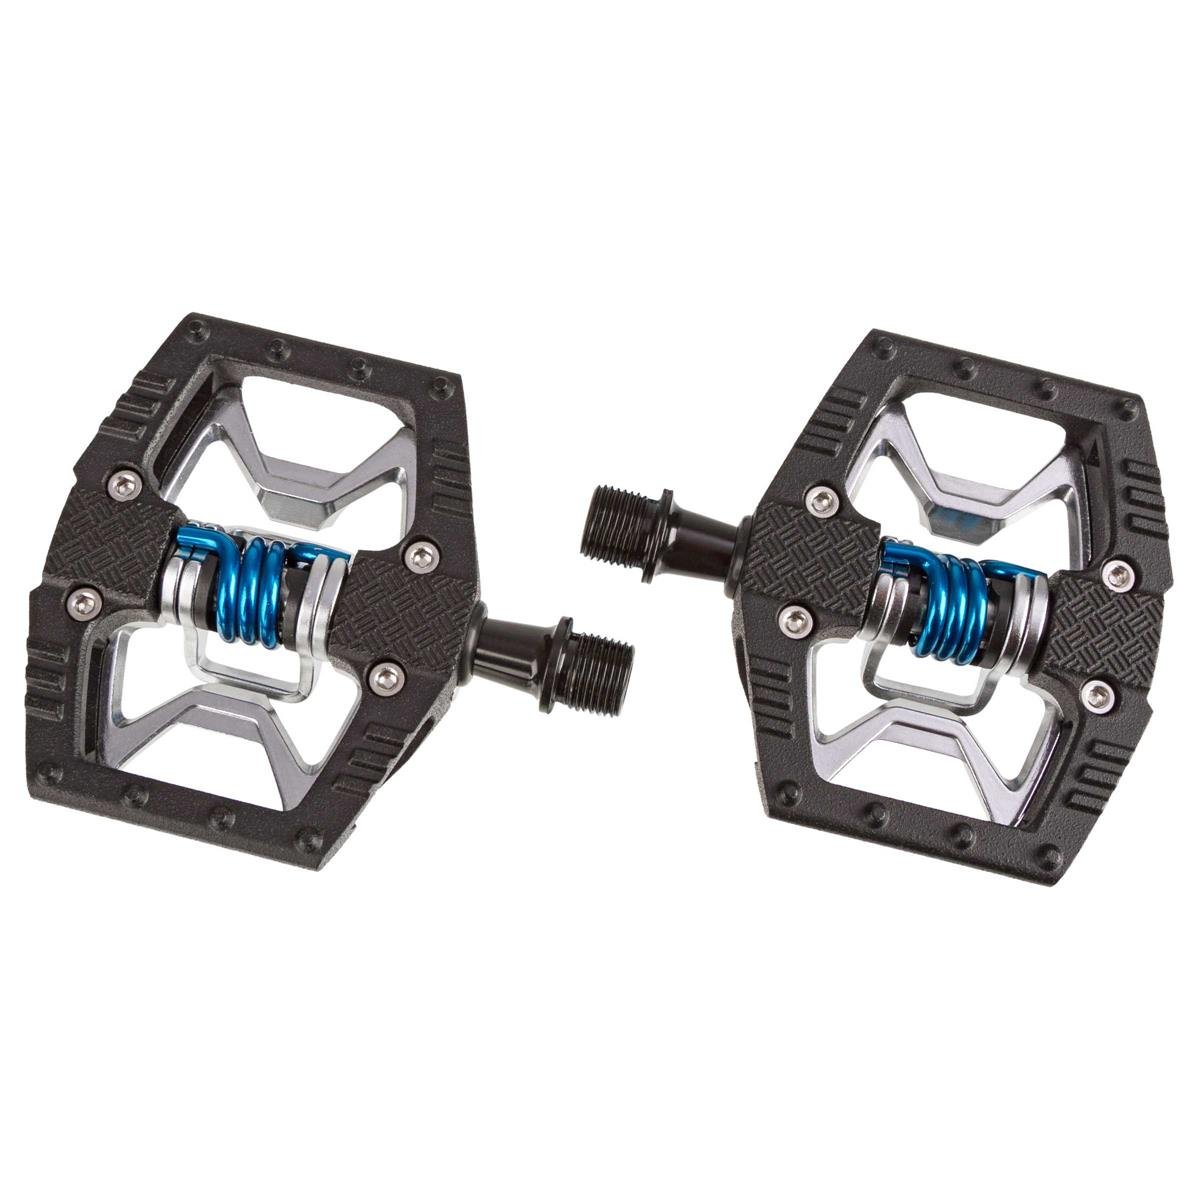 Crankbrothers Hybrid Pedals Double Shot 2 Black/Raw/Blue